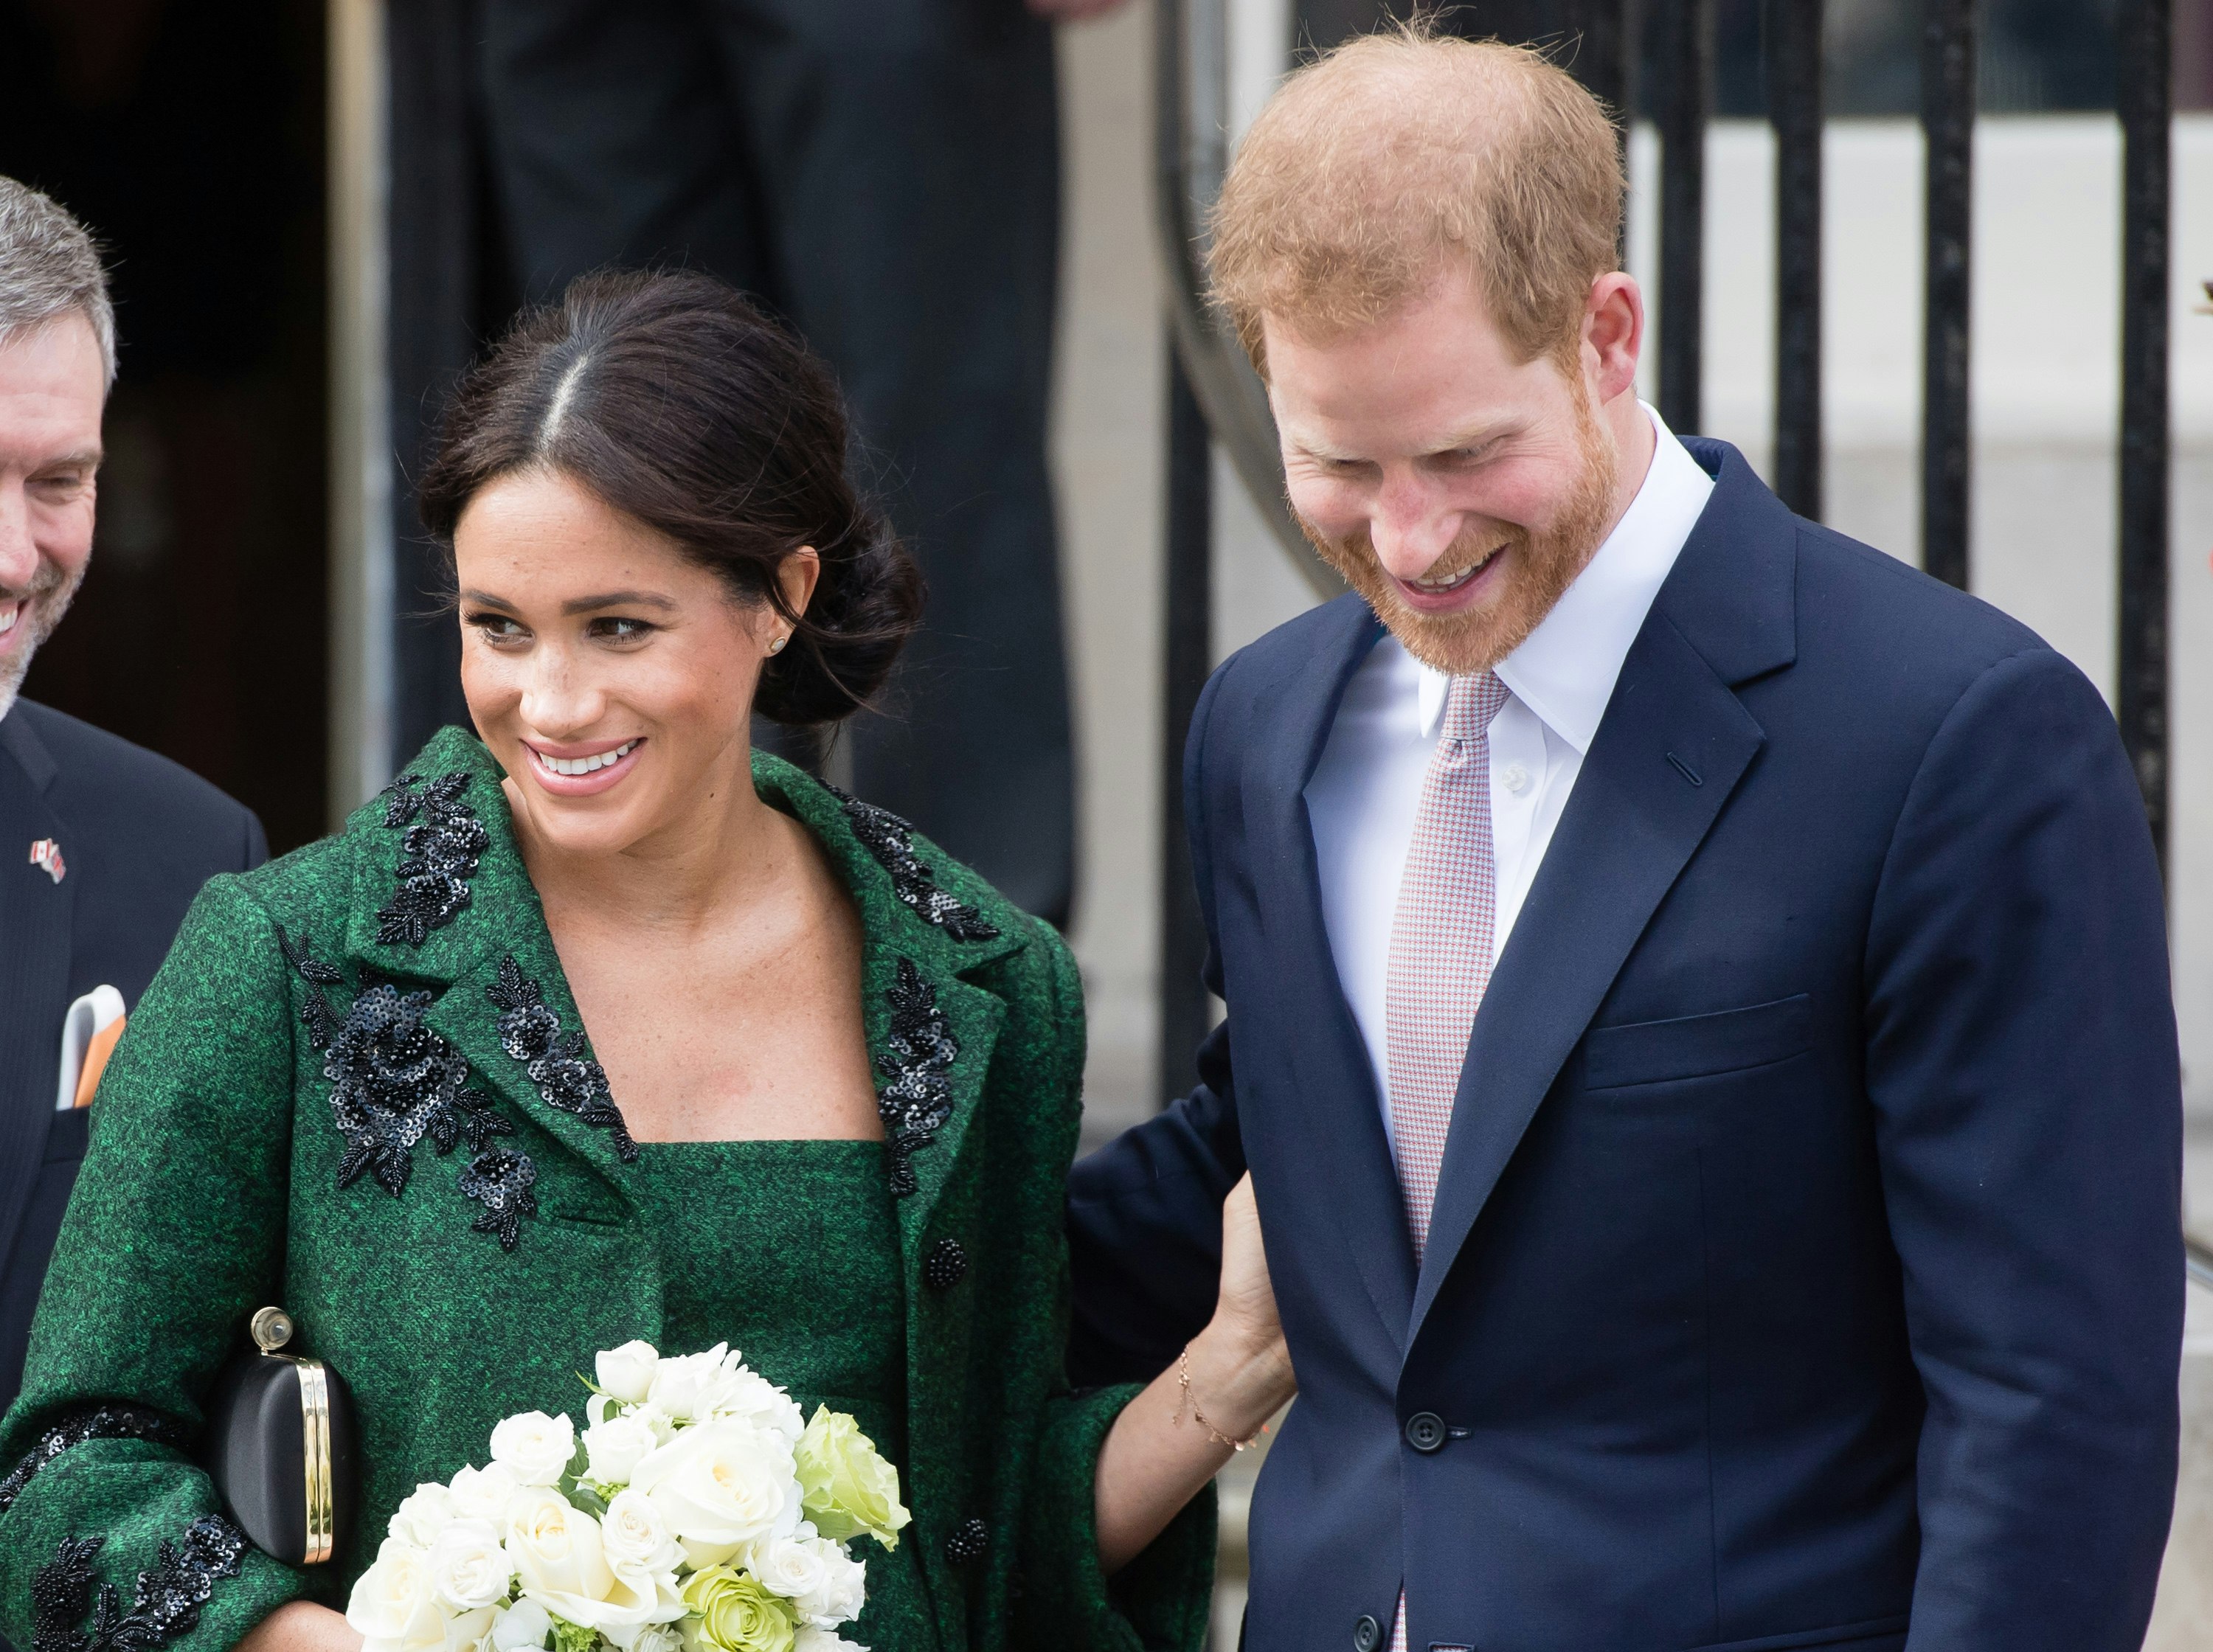 Meghan Markle, Relatable Human, Just Wore a $35 H&M Maternity Dress   Maternity fashion, Meghan markle maternity style, Meghan markle maternity